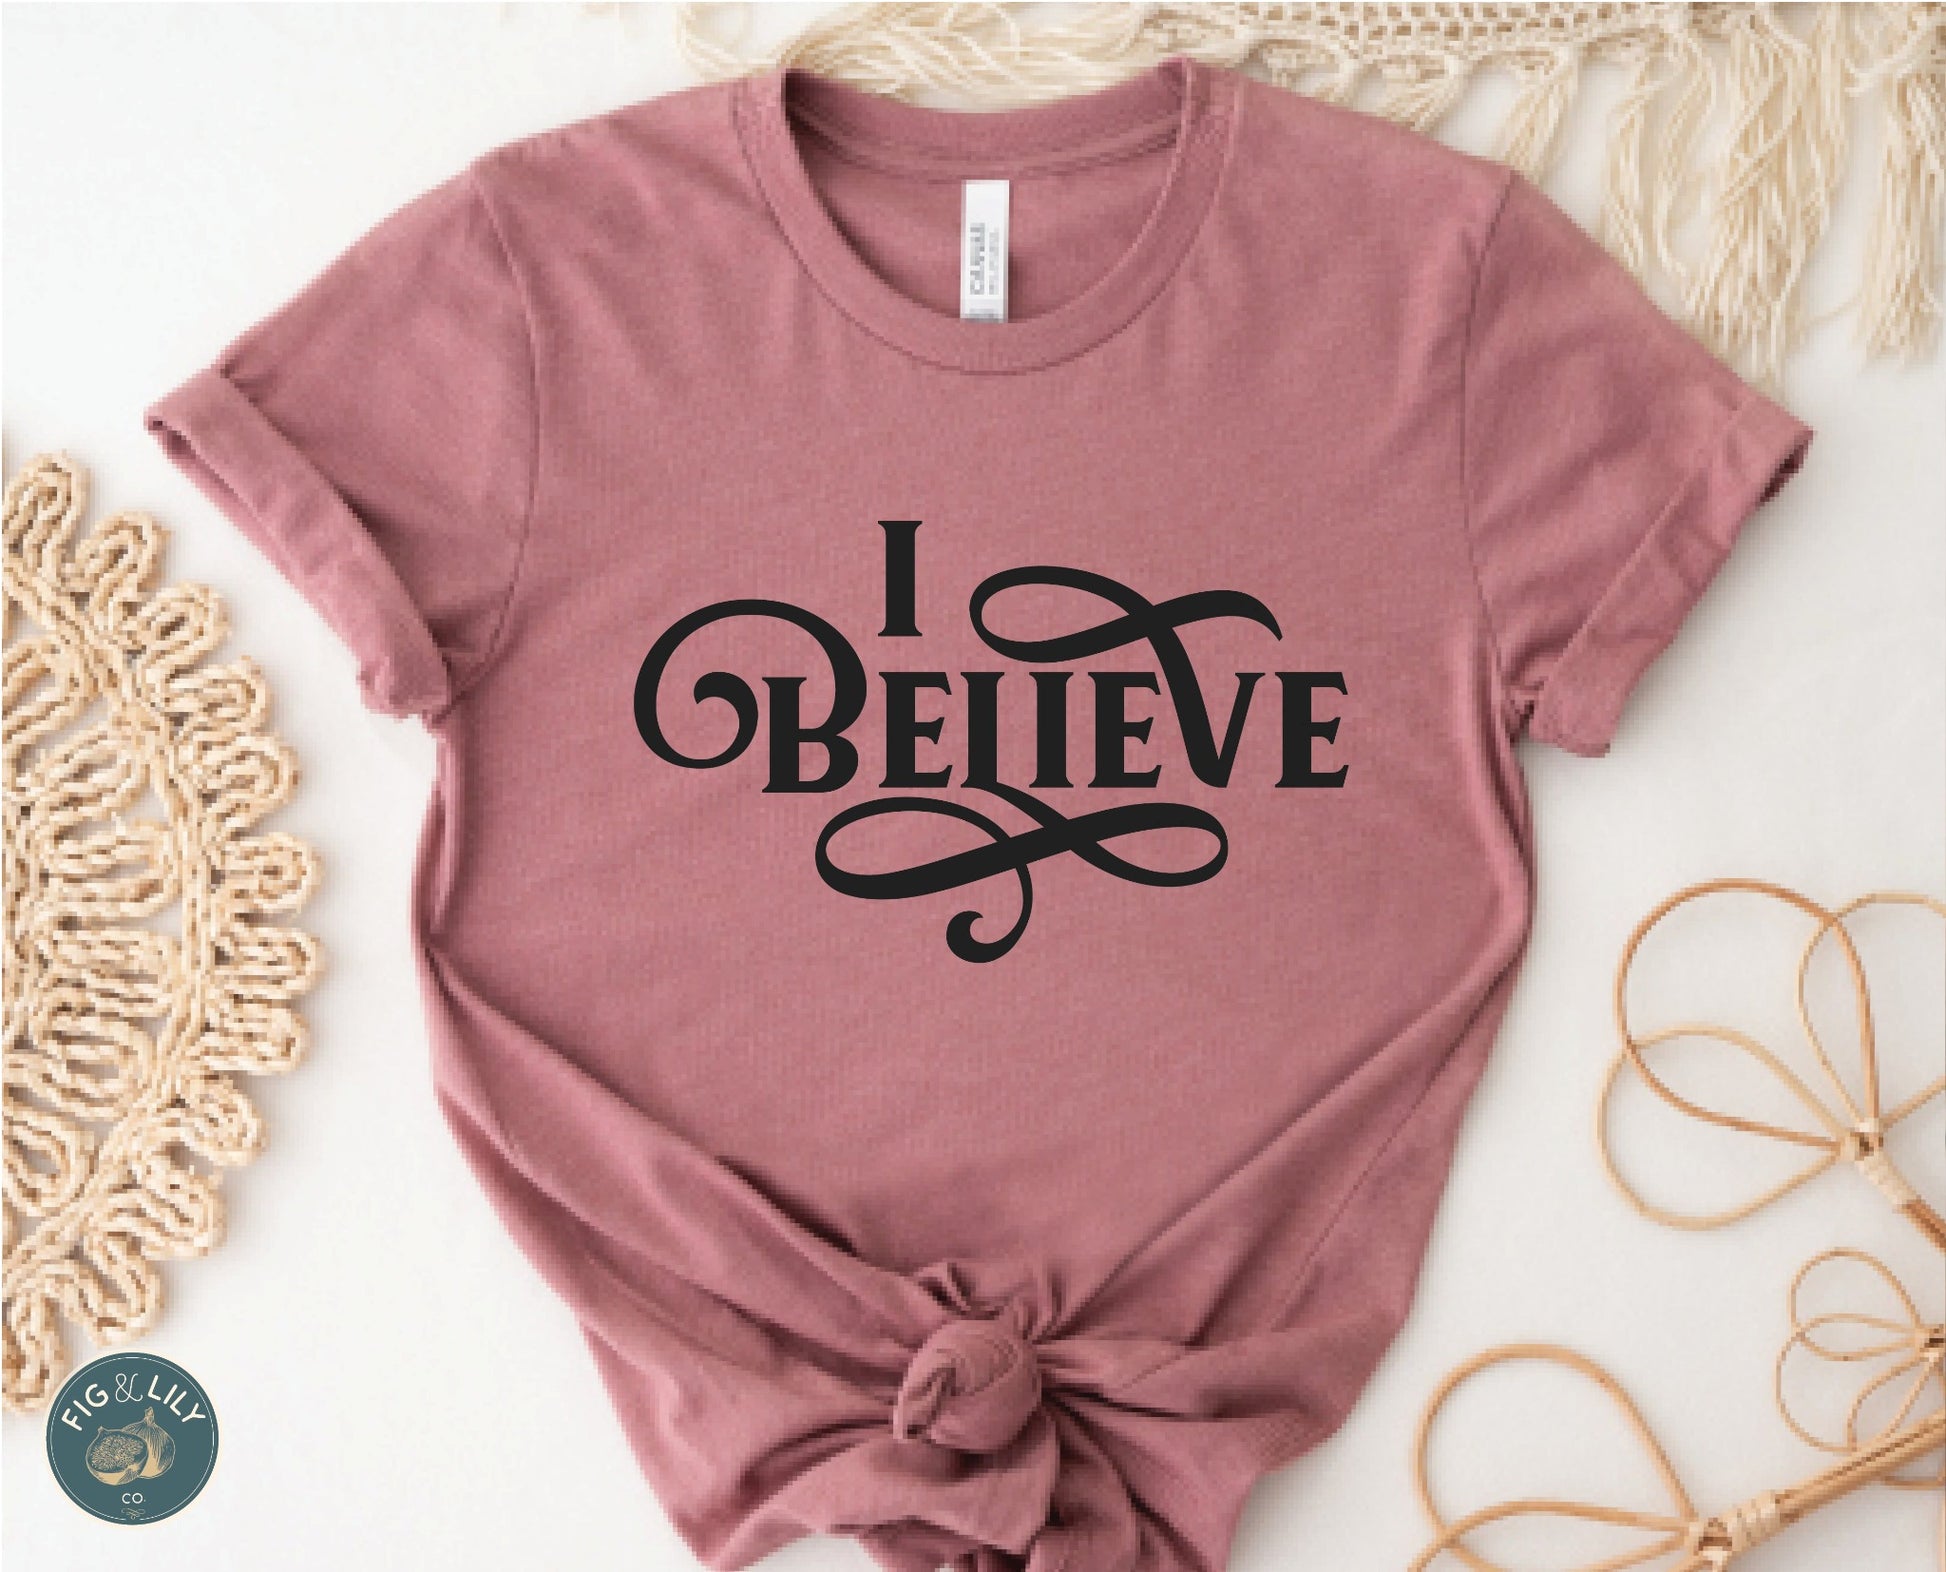 I Believe Swirl Christian aesthetic Jesus believer t-shirt design printed in black on soft mauve dusty rose tee for women, great gift for her